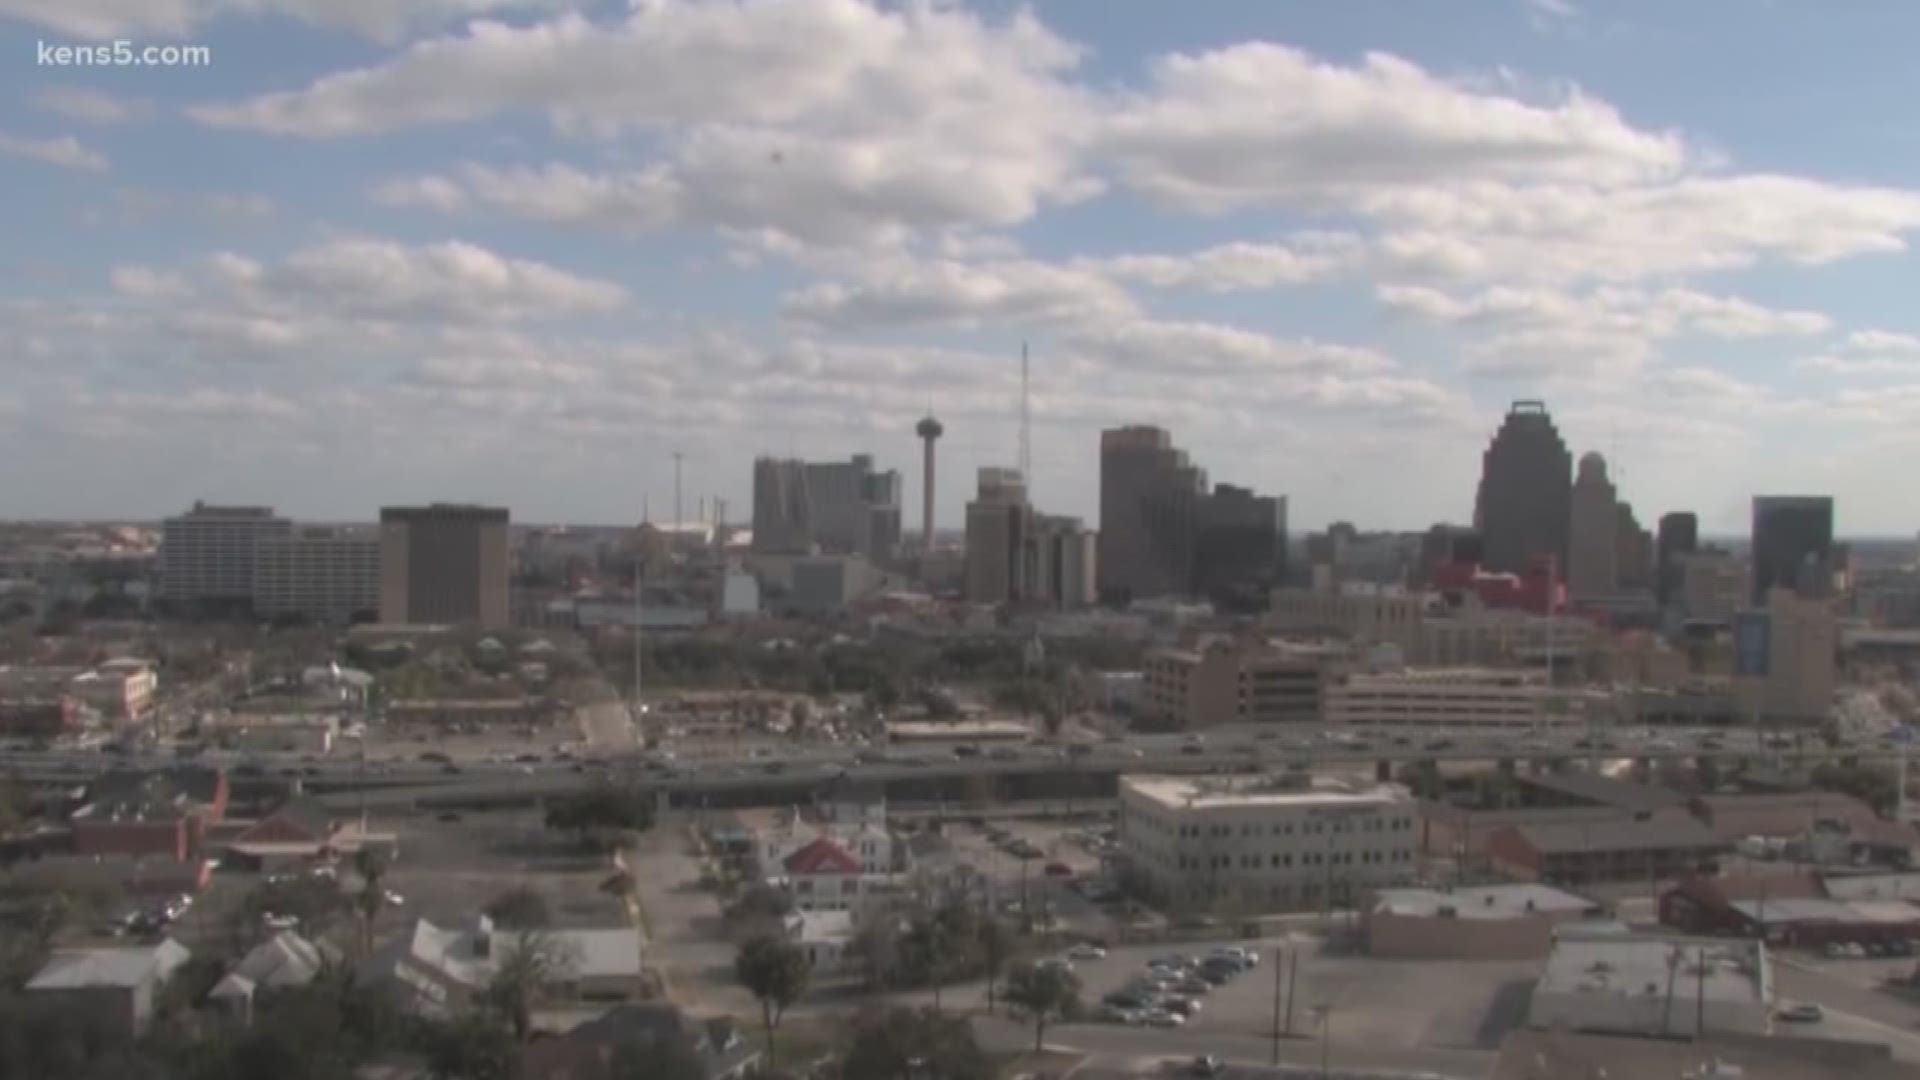 San Antonio is big already - and getting bigger - that's the word from the U.S. Census Bureau. San Antonio tops a new list of growing U.S. populations adding more than 24,000 people last year. Eyewitness News reporter Aaron Wright joins us to break down w